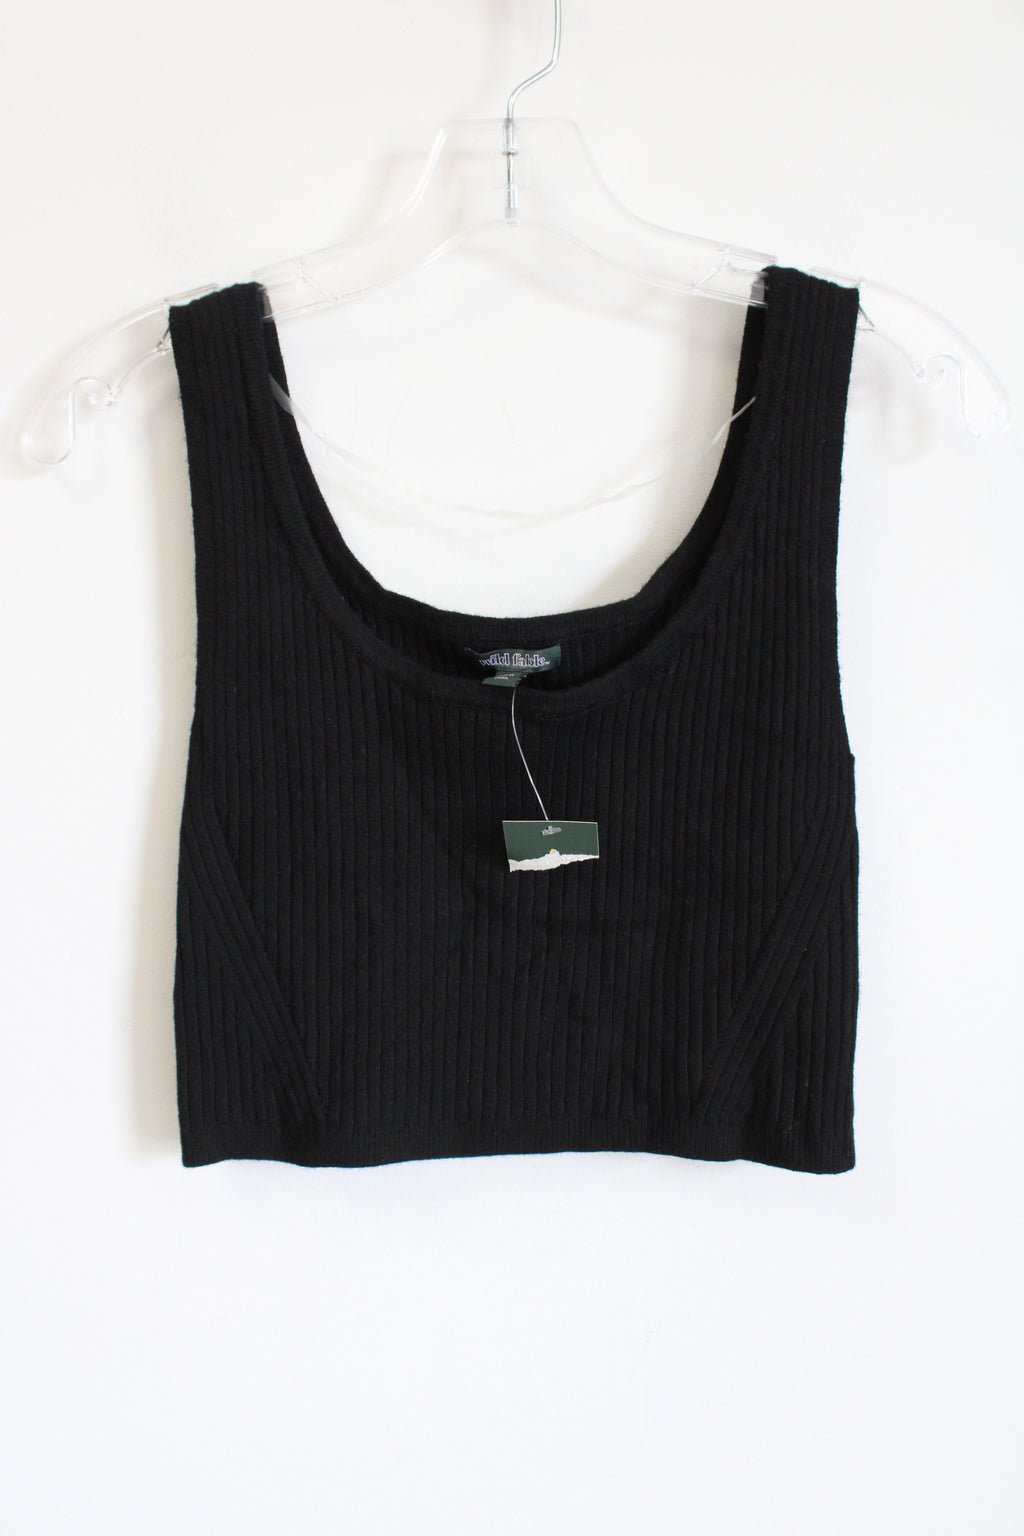 NEW Wild Fable Black Ribbed Knit Crop Tank | M